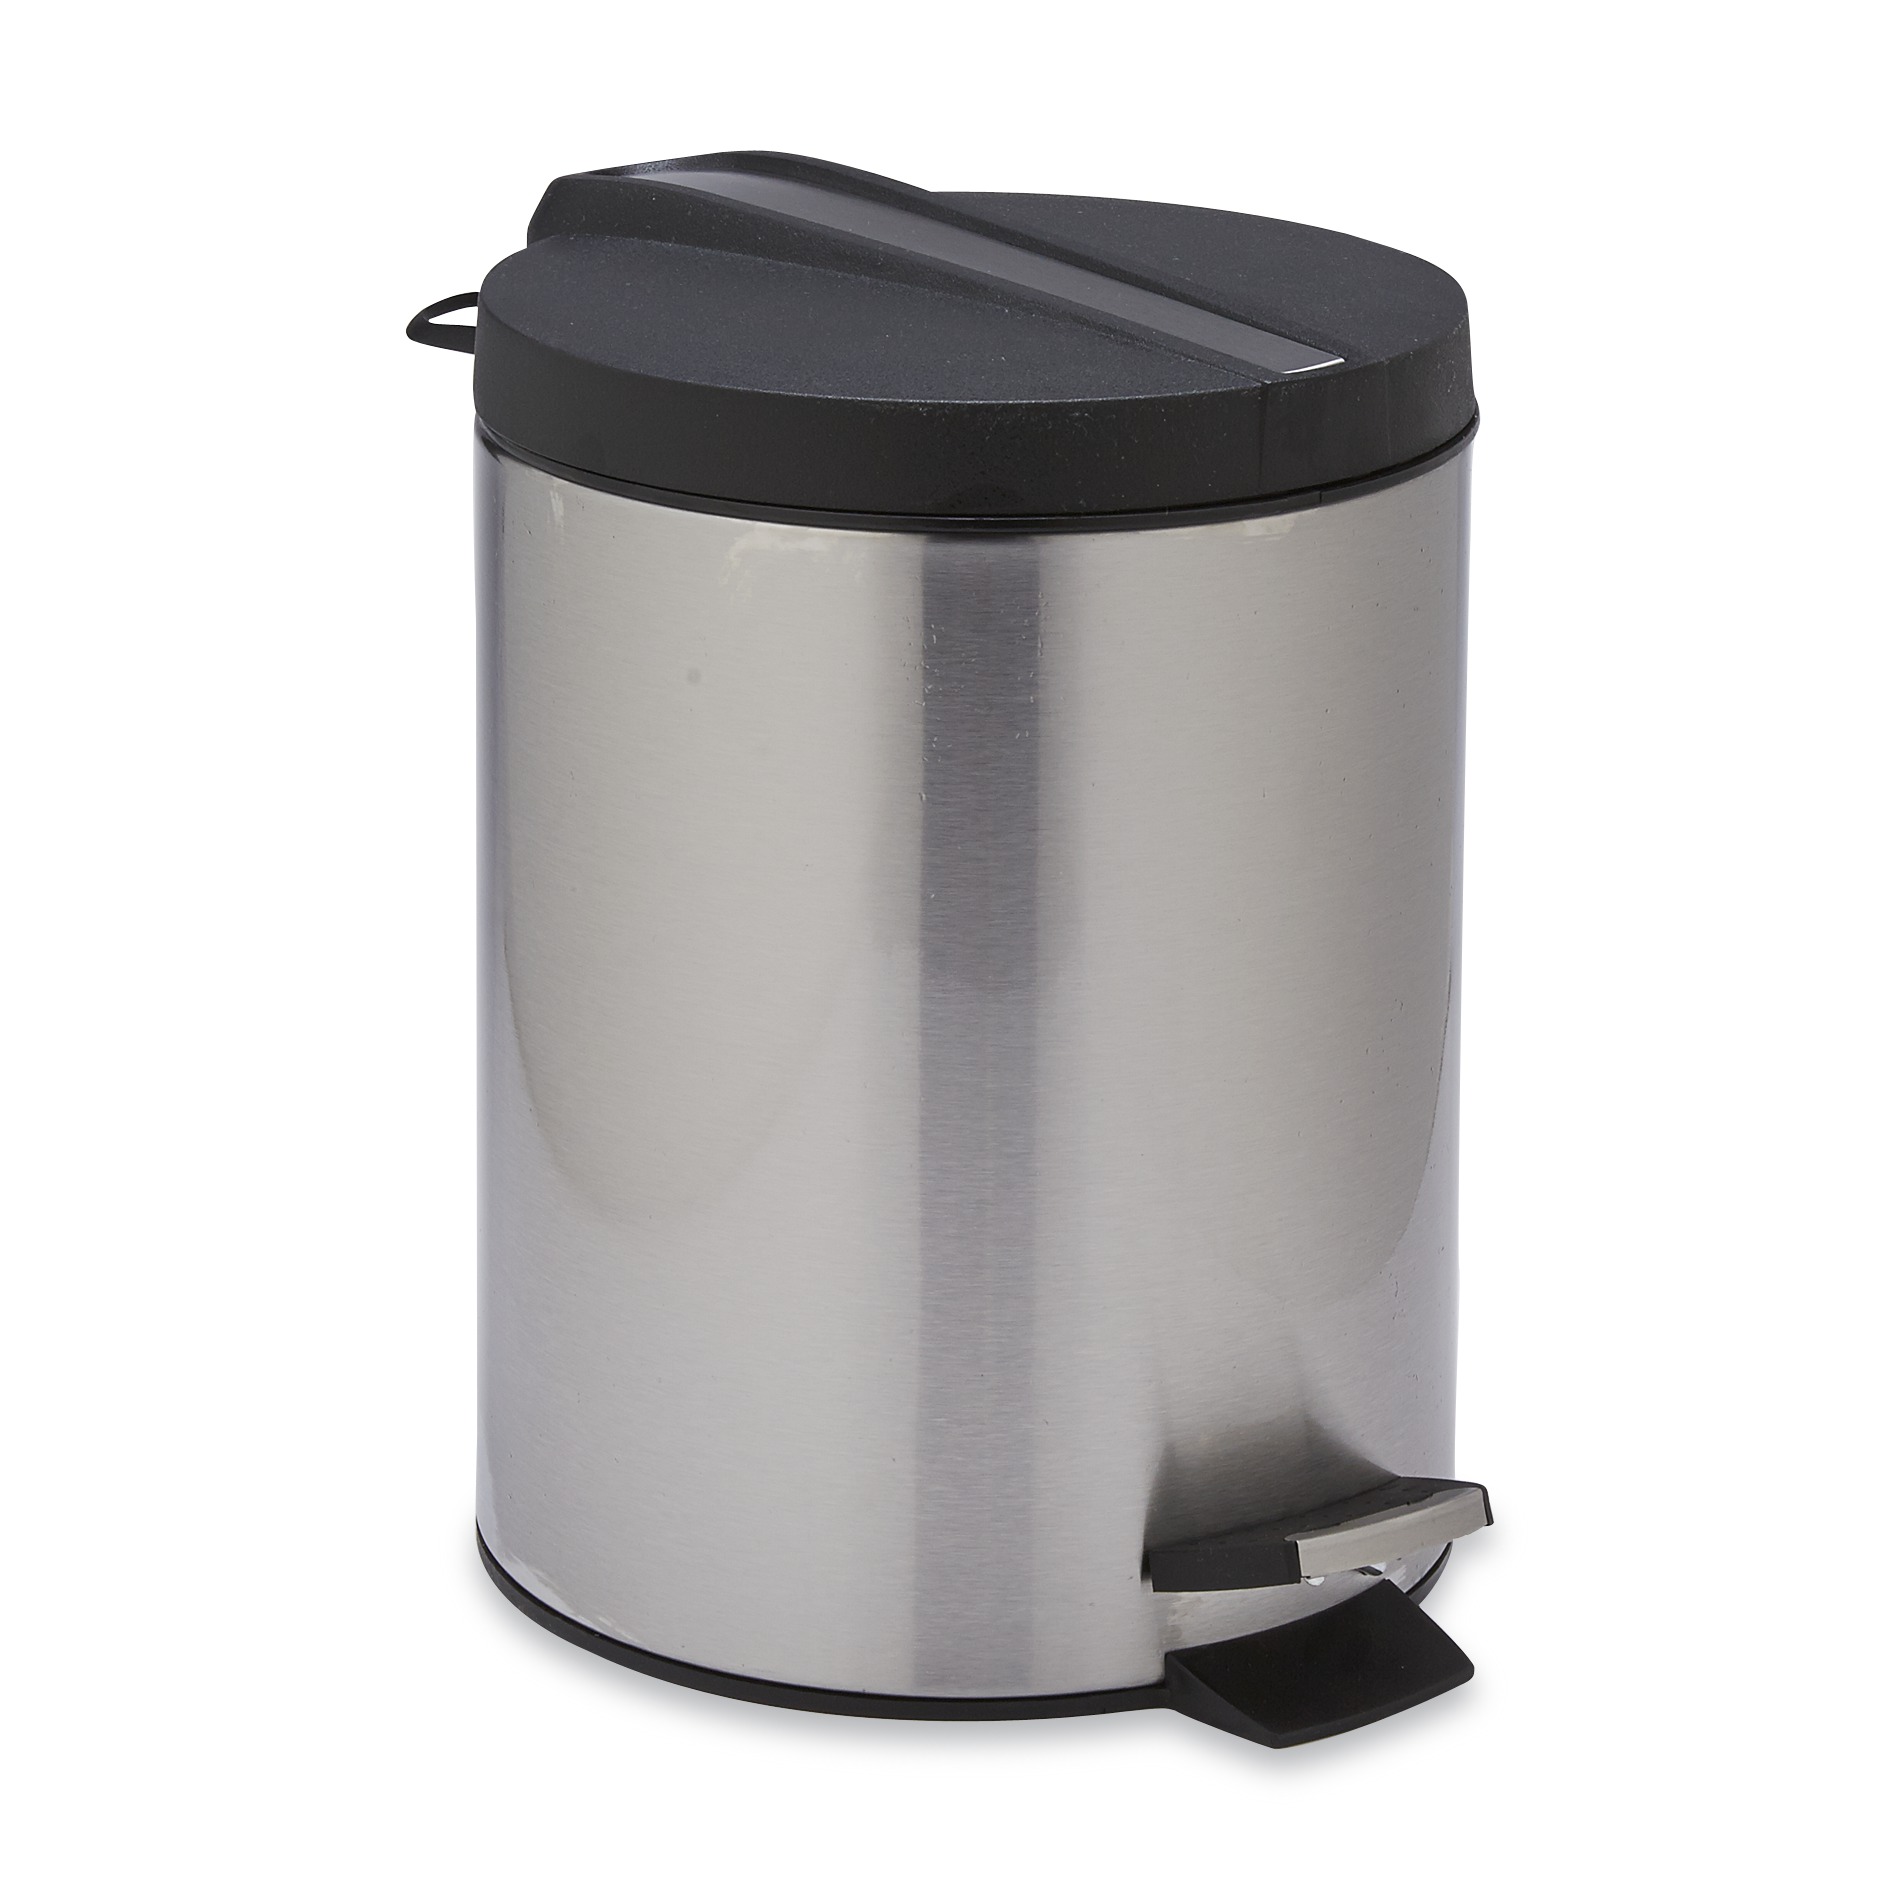 Essential Home 5-Liter Garbage Can